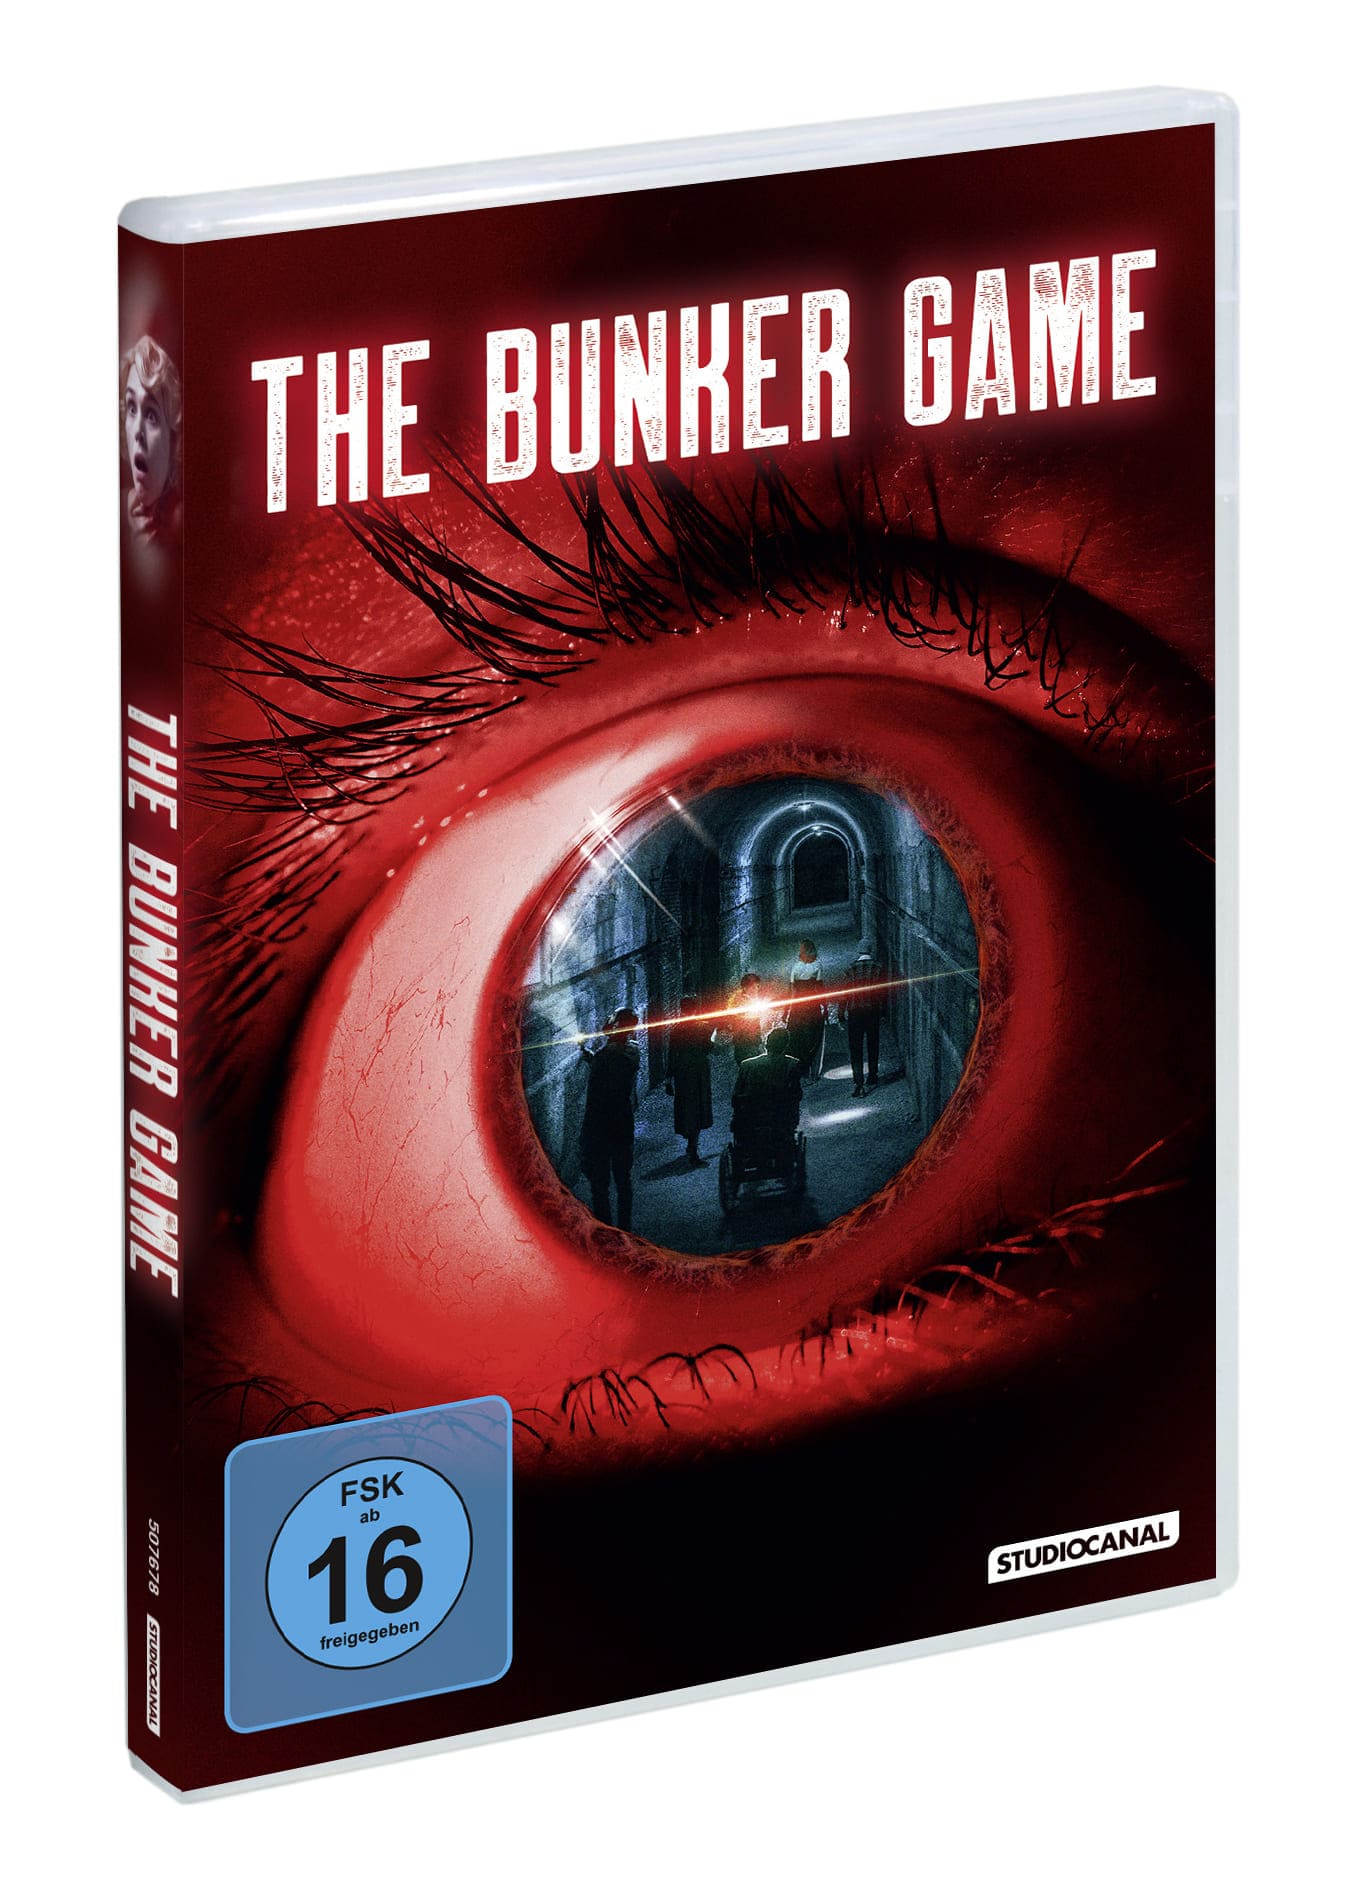 The Bunker Game (DVD) Image 2